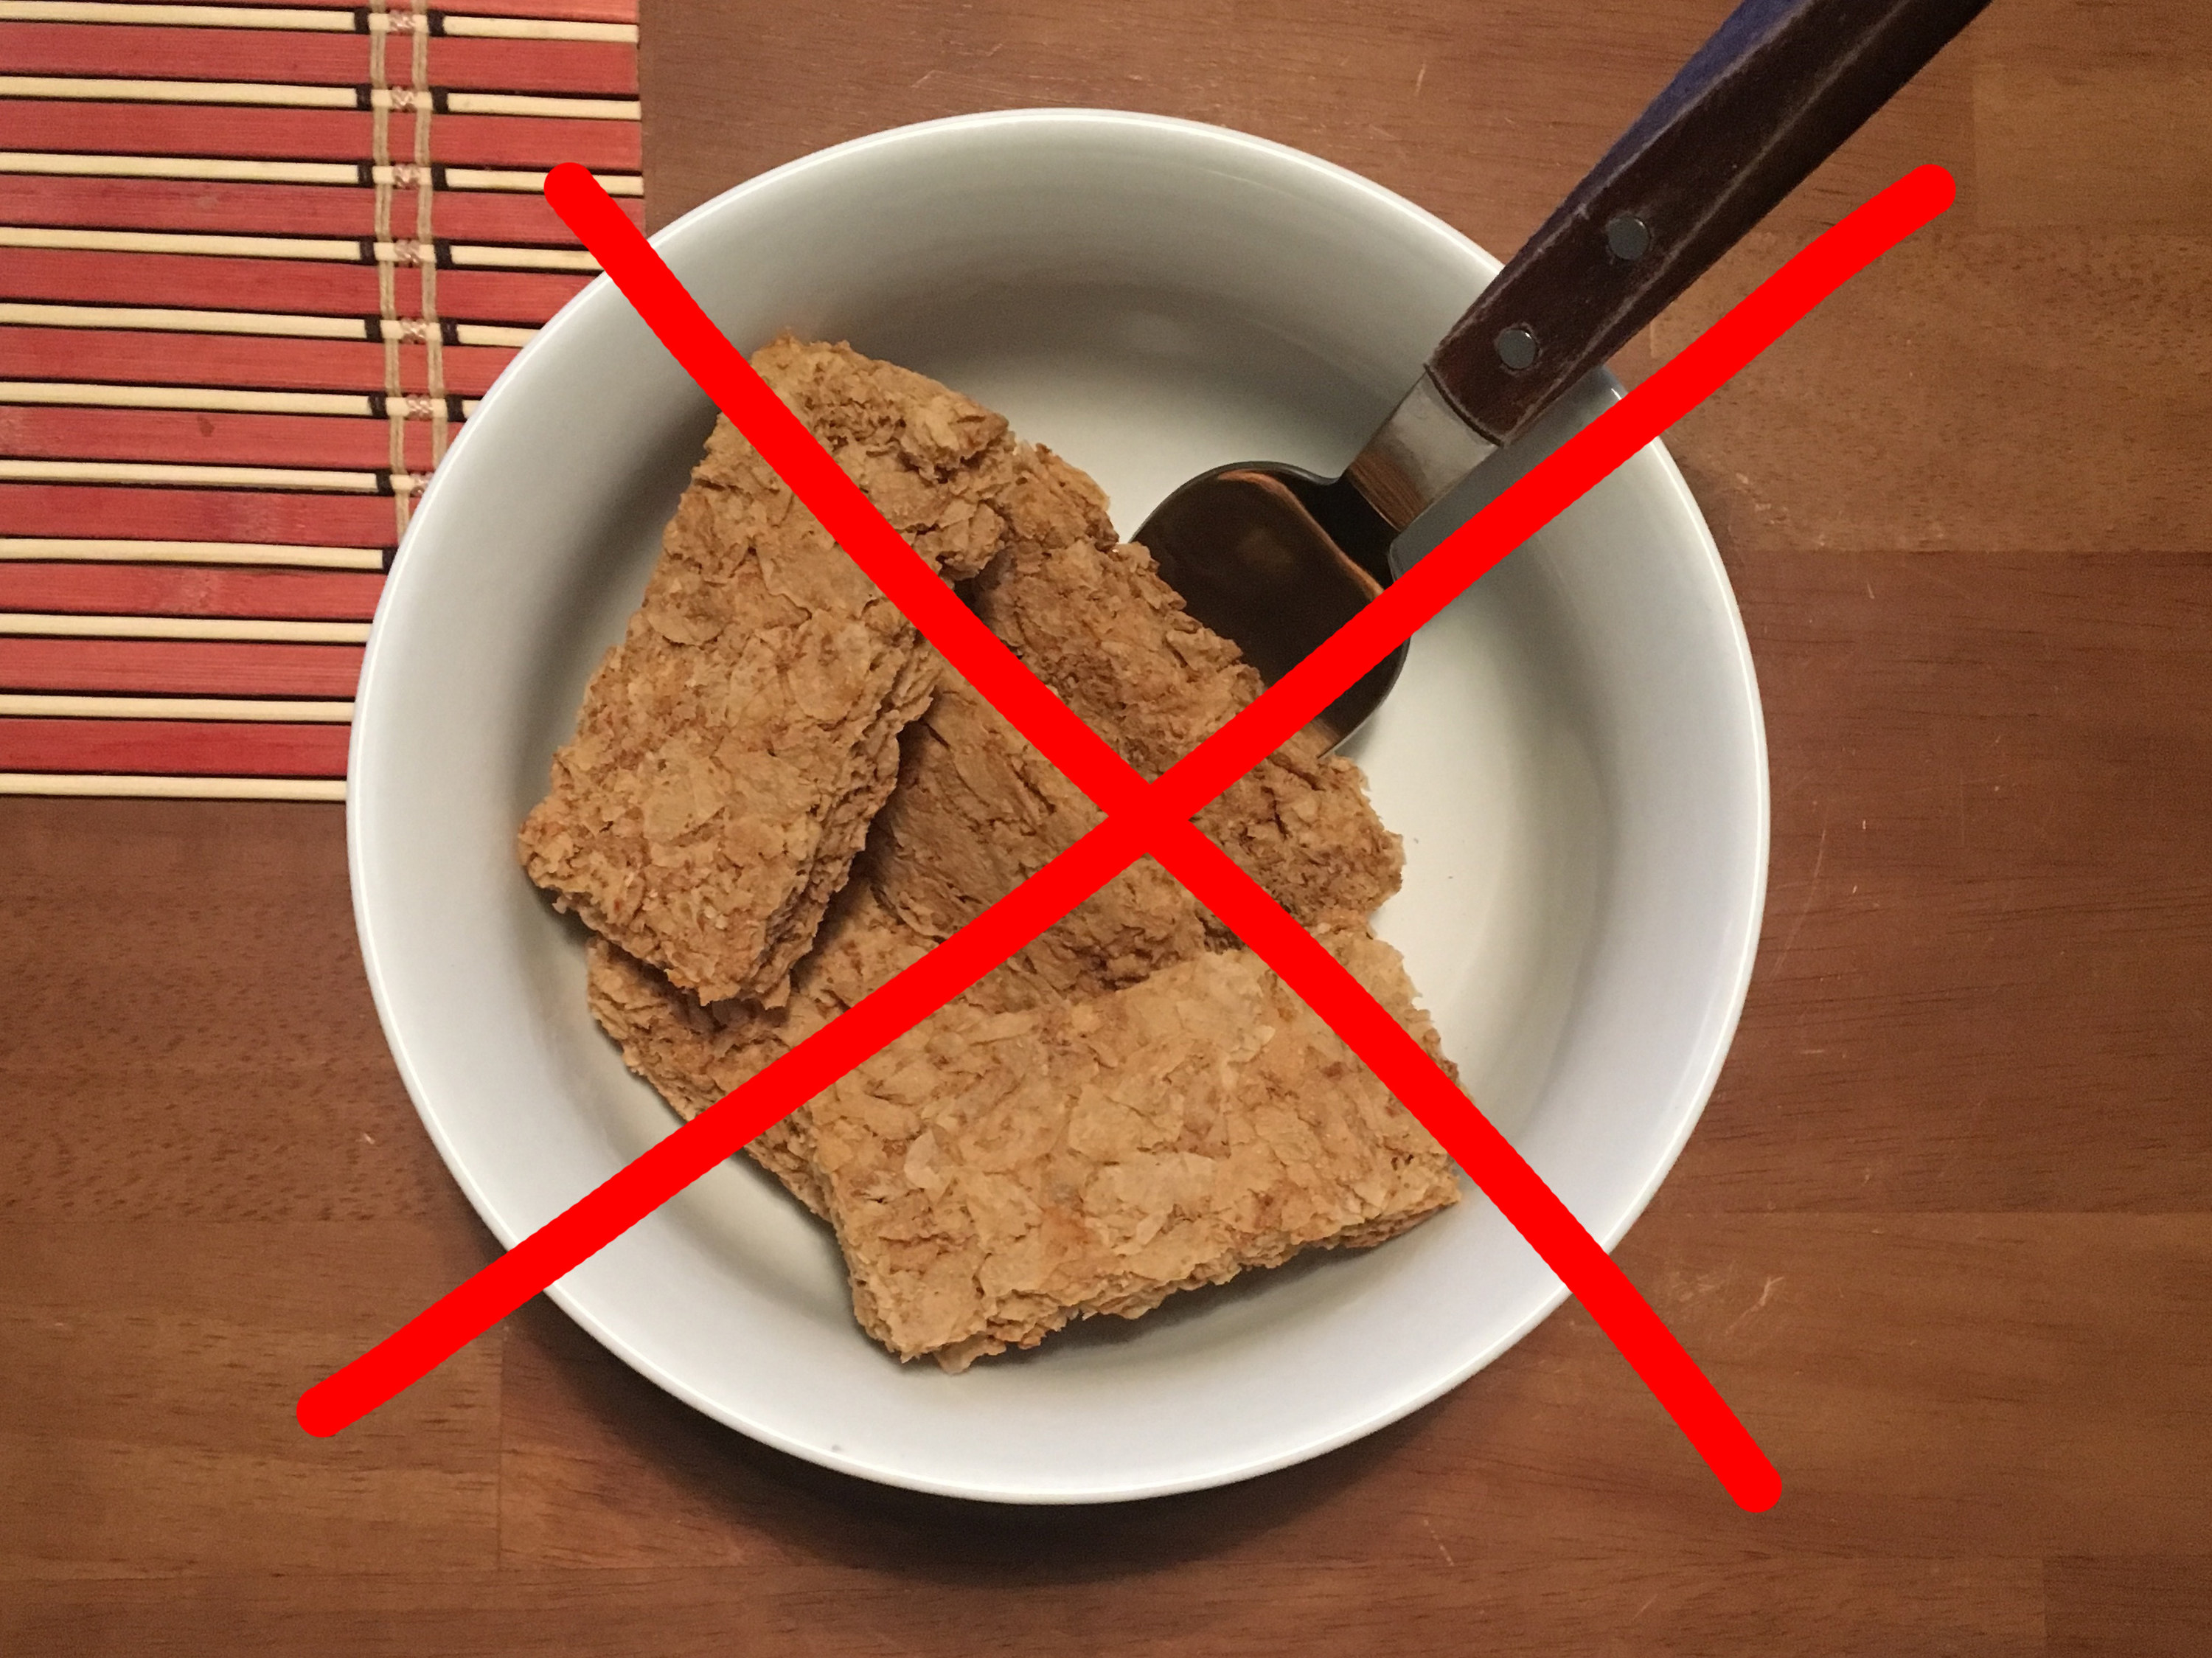 A bowl of Weet-Bix with a wrong red cross drawn over the top